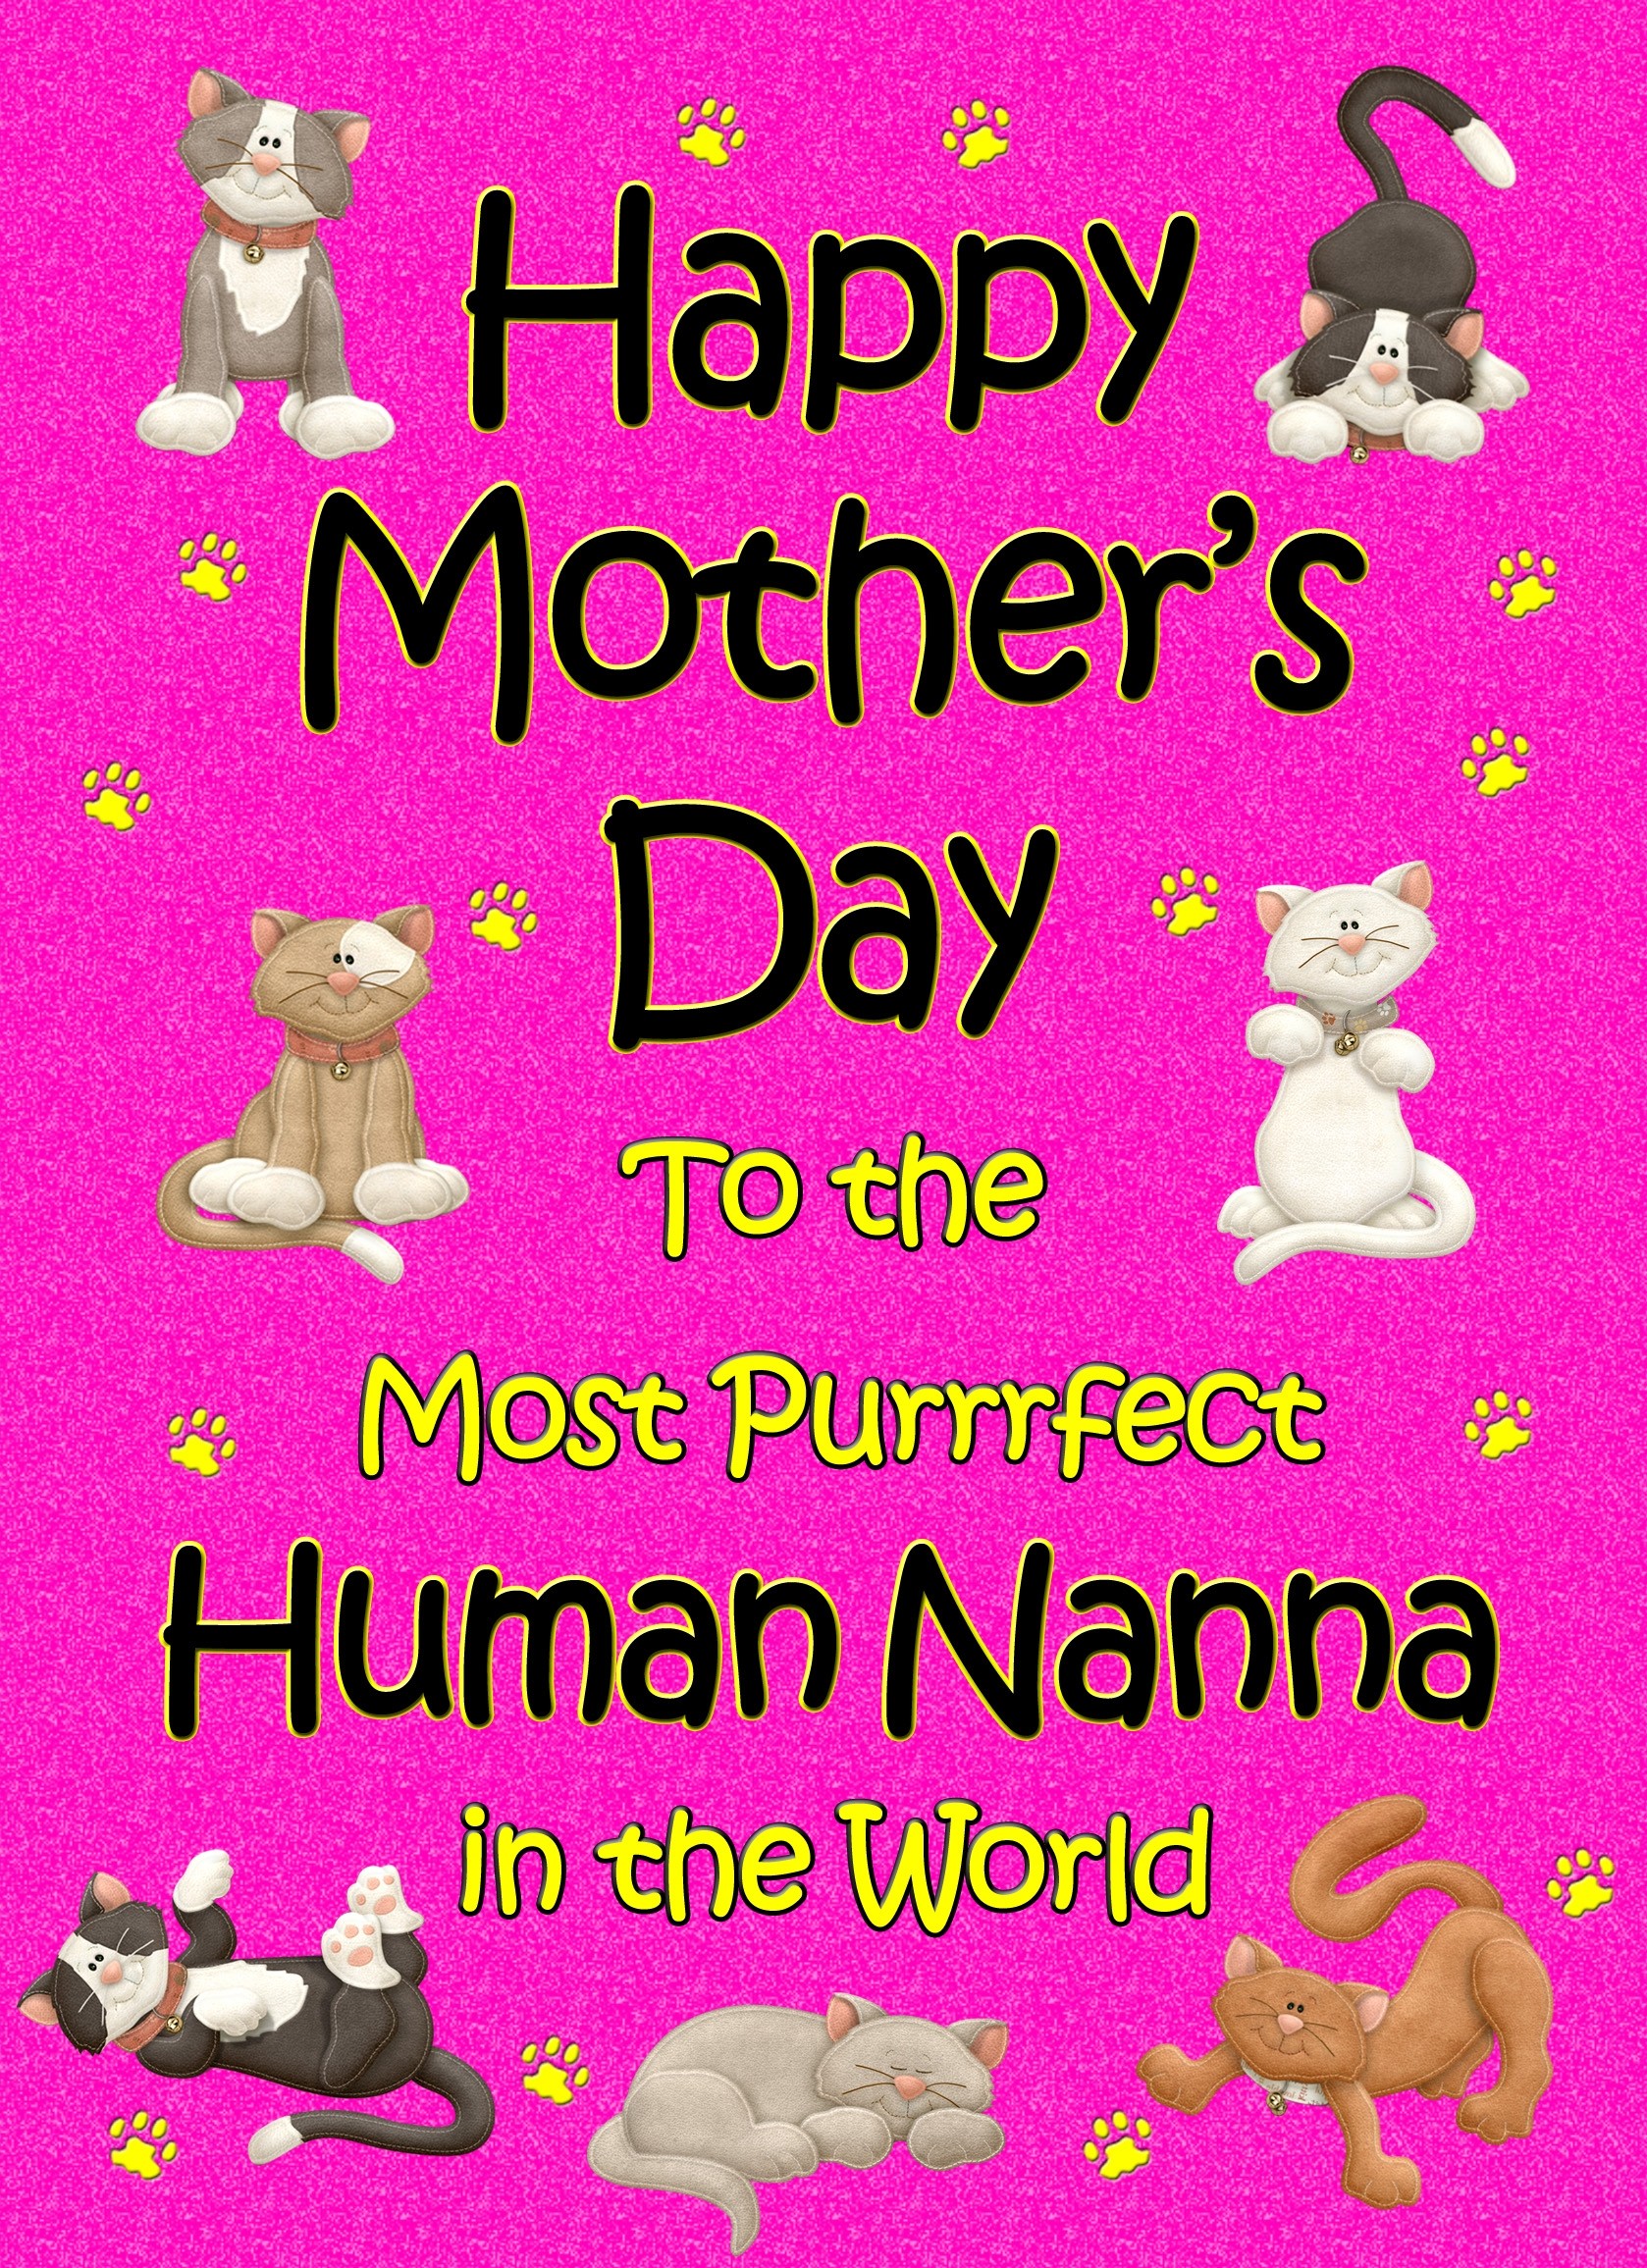 From The Cat Mothers Day Card (Cerise, Purrrfect Human Nanna)